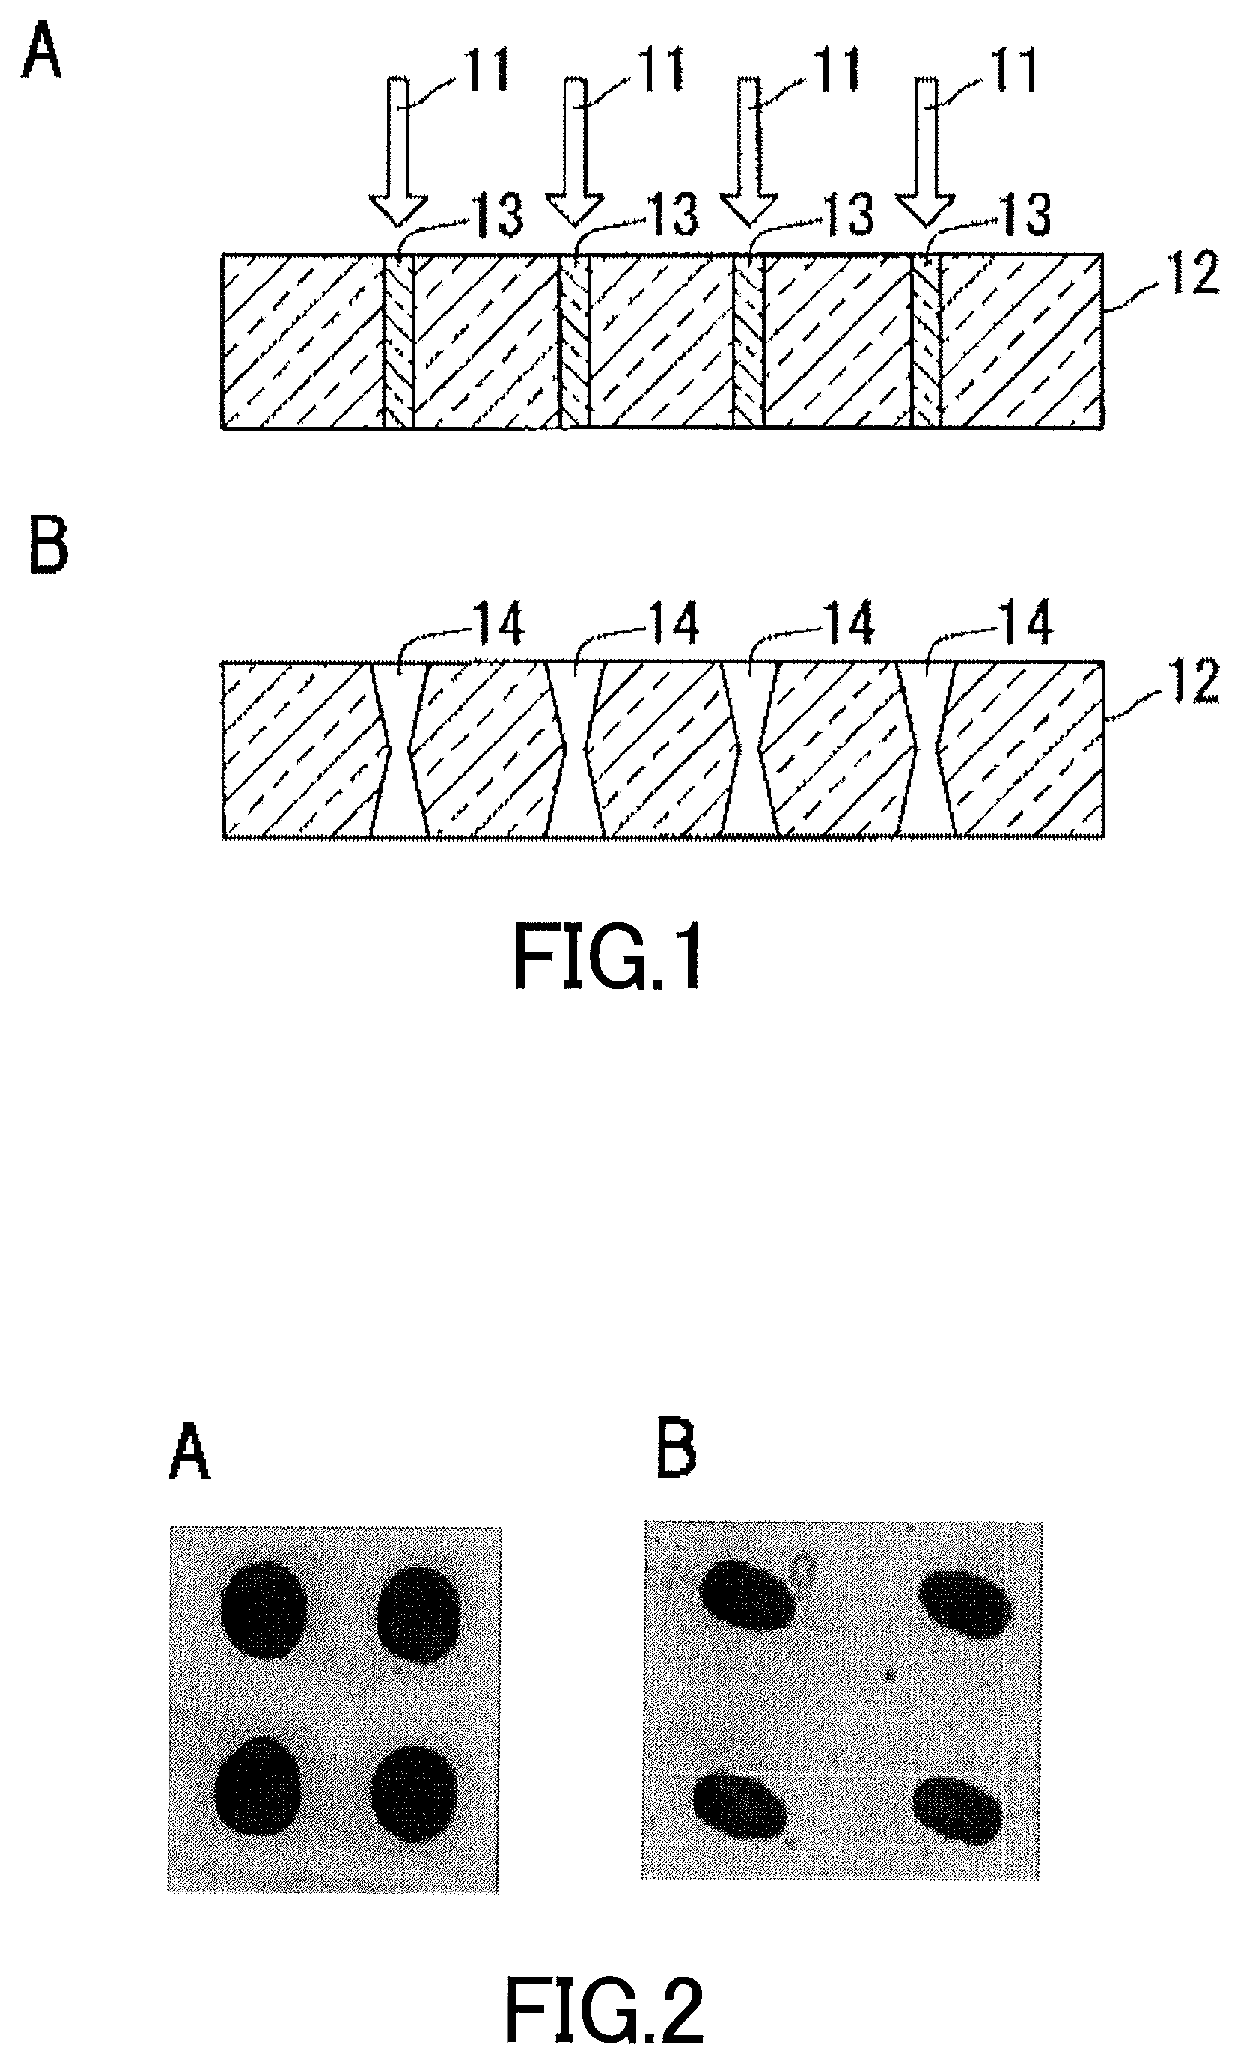 Glass for laser processing and method for producing perforated glass using same